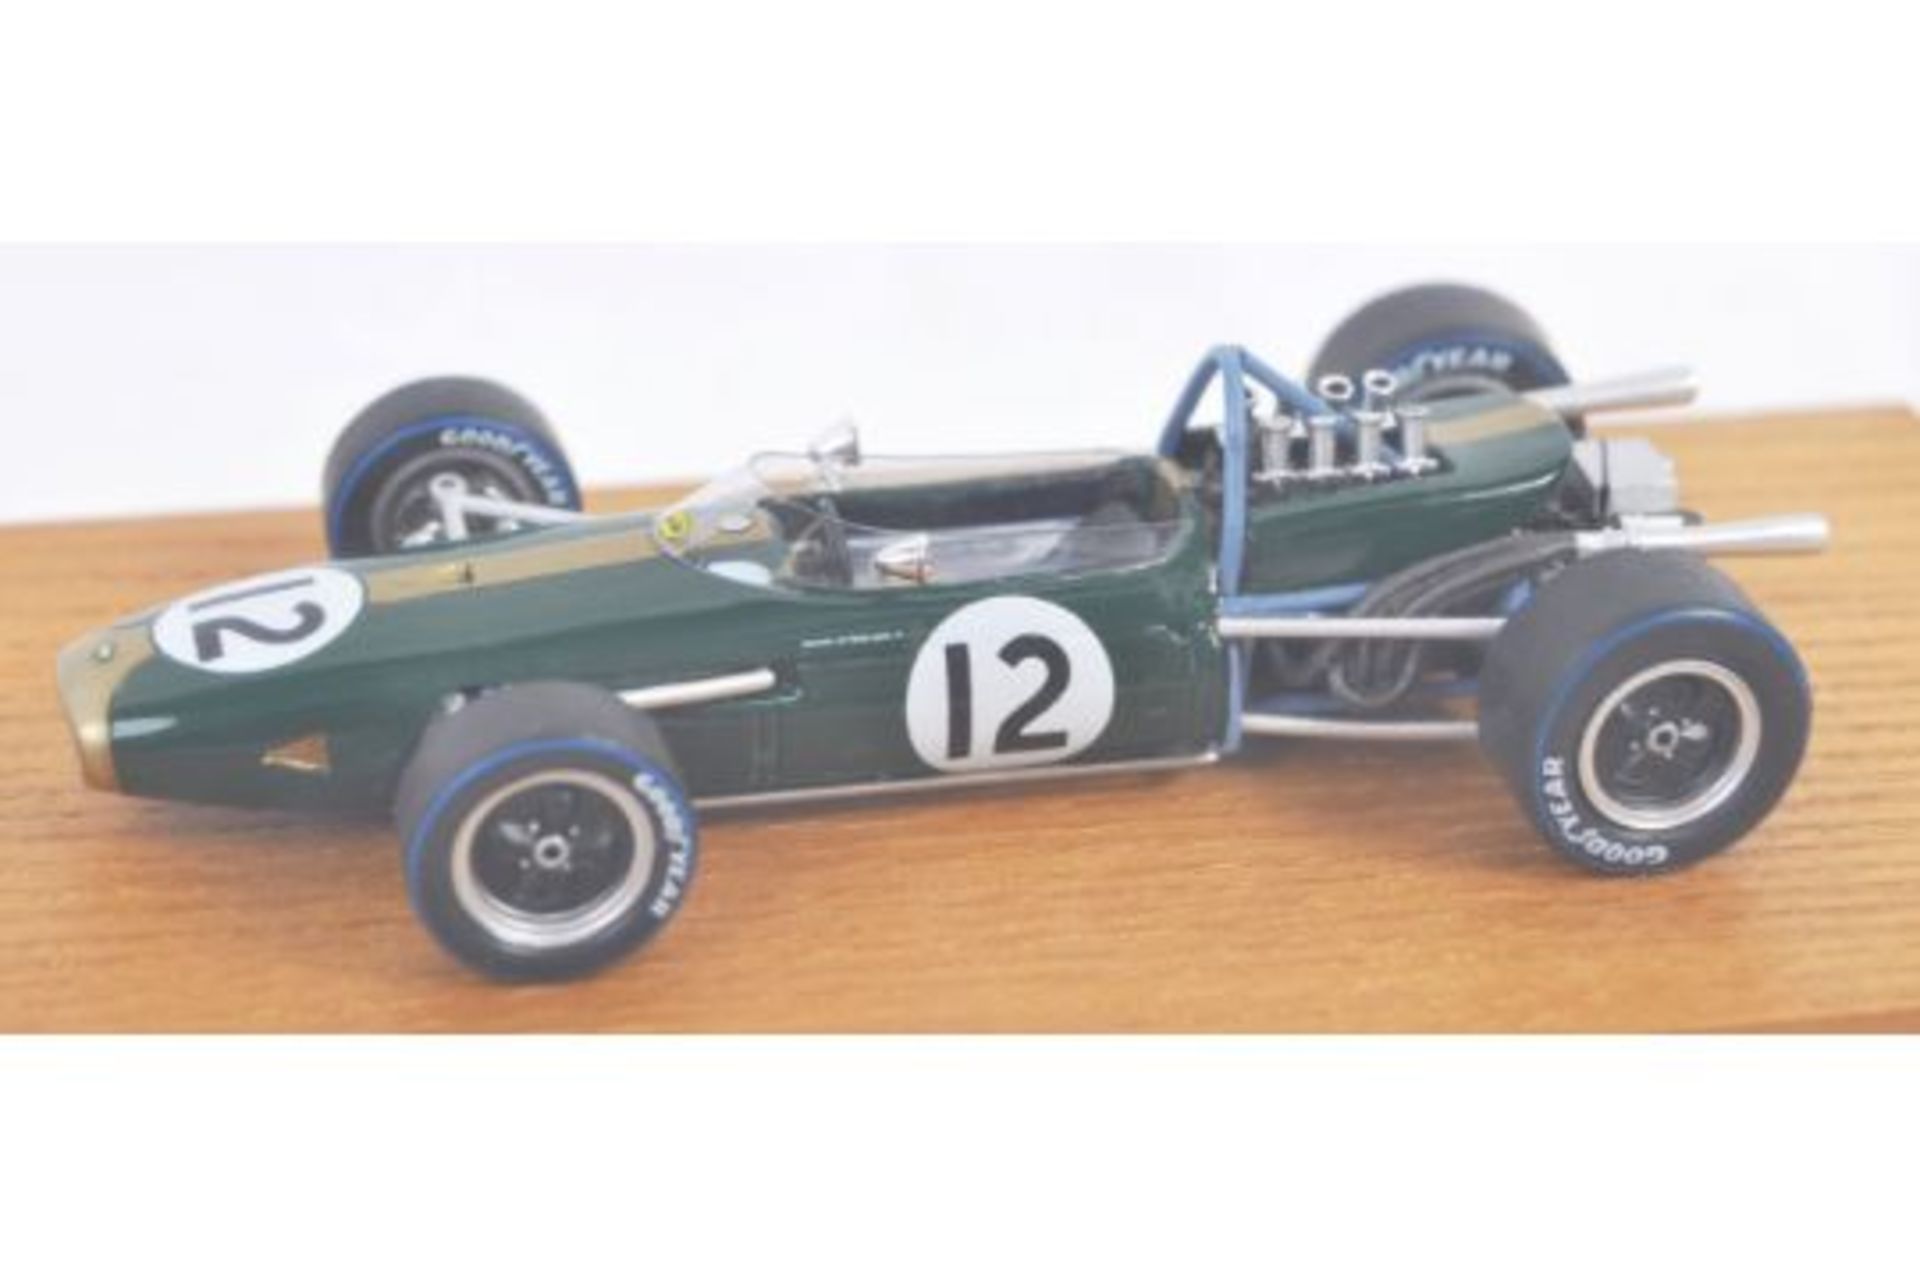 TOP GEAR LEGENDS 1:43 SCALE PRECISION DIECAST MODELS - Image 4 of 10